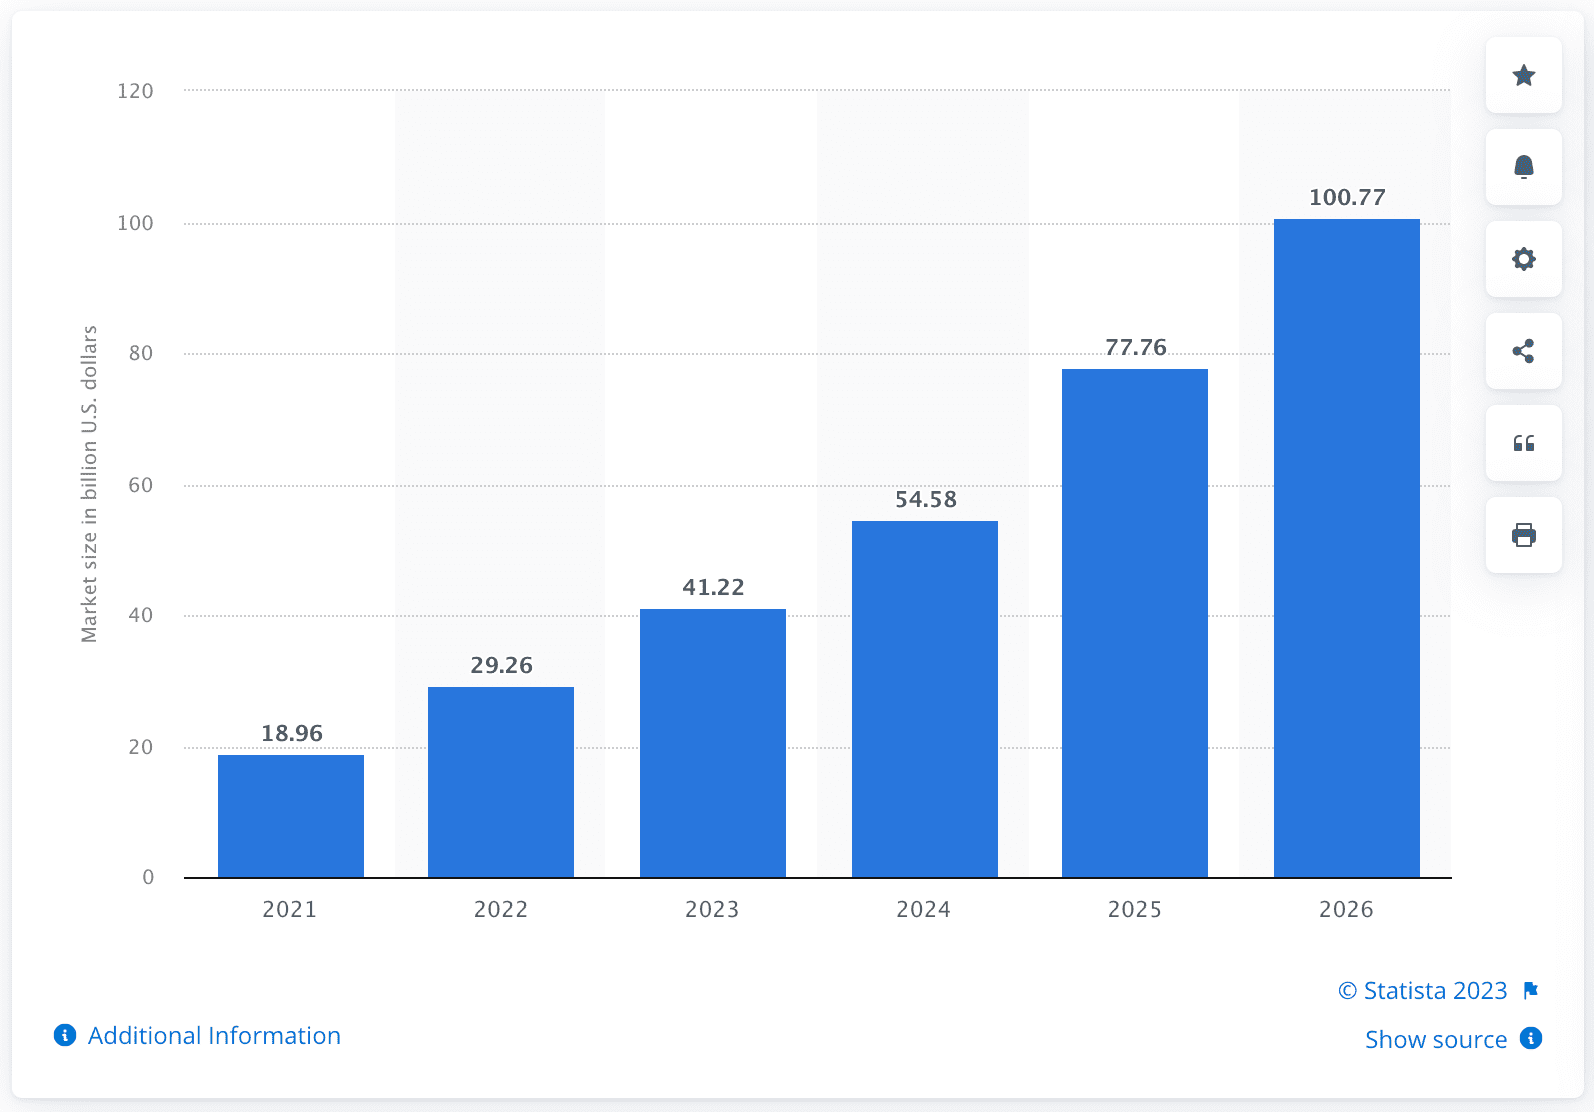 Extended reality (XR) market size worldwide from 2021 to 2026